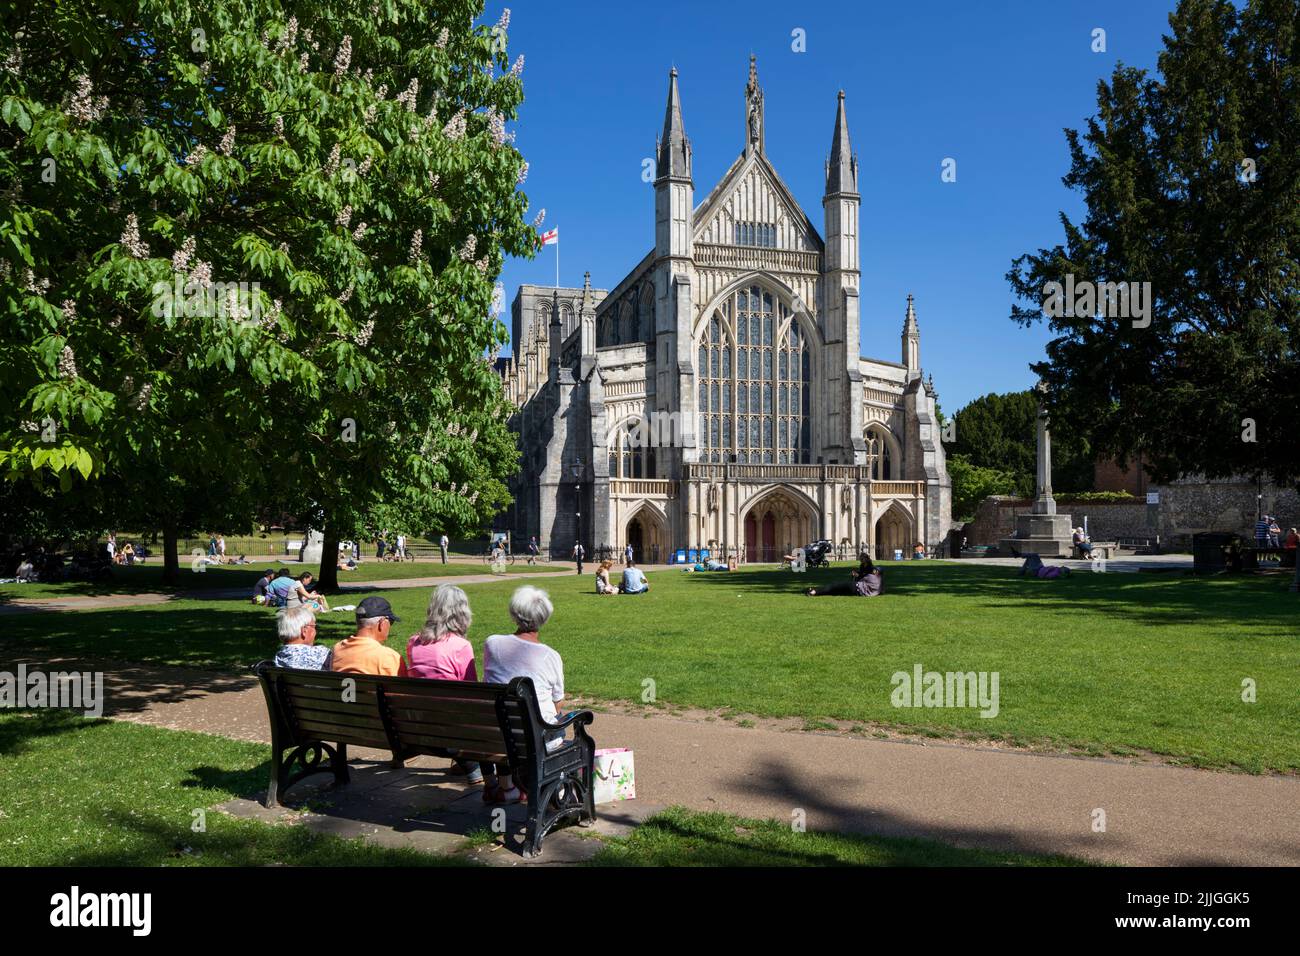 West front of Winchester Cathedral, Winchester, Hampshire, England, United Kingdom, Europe Stock Photo